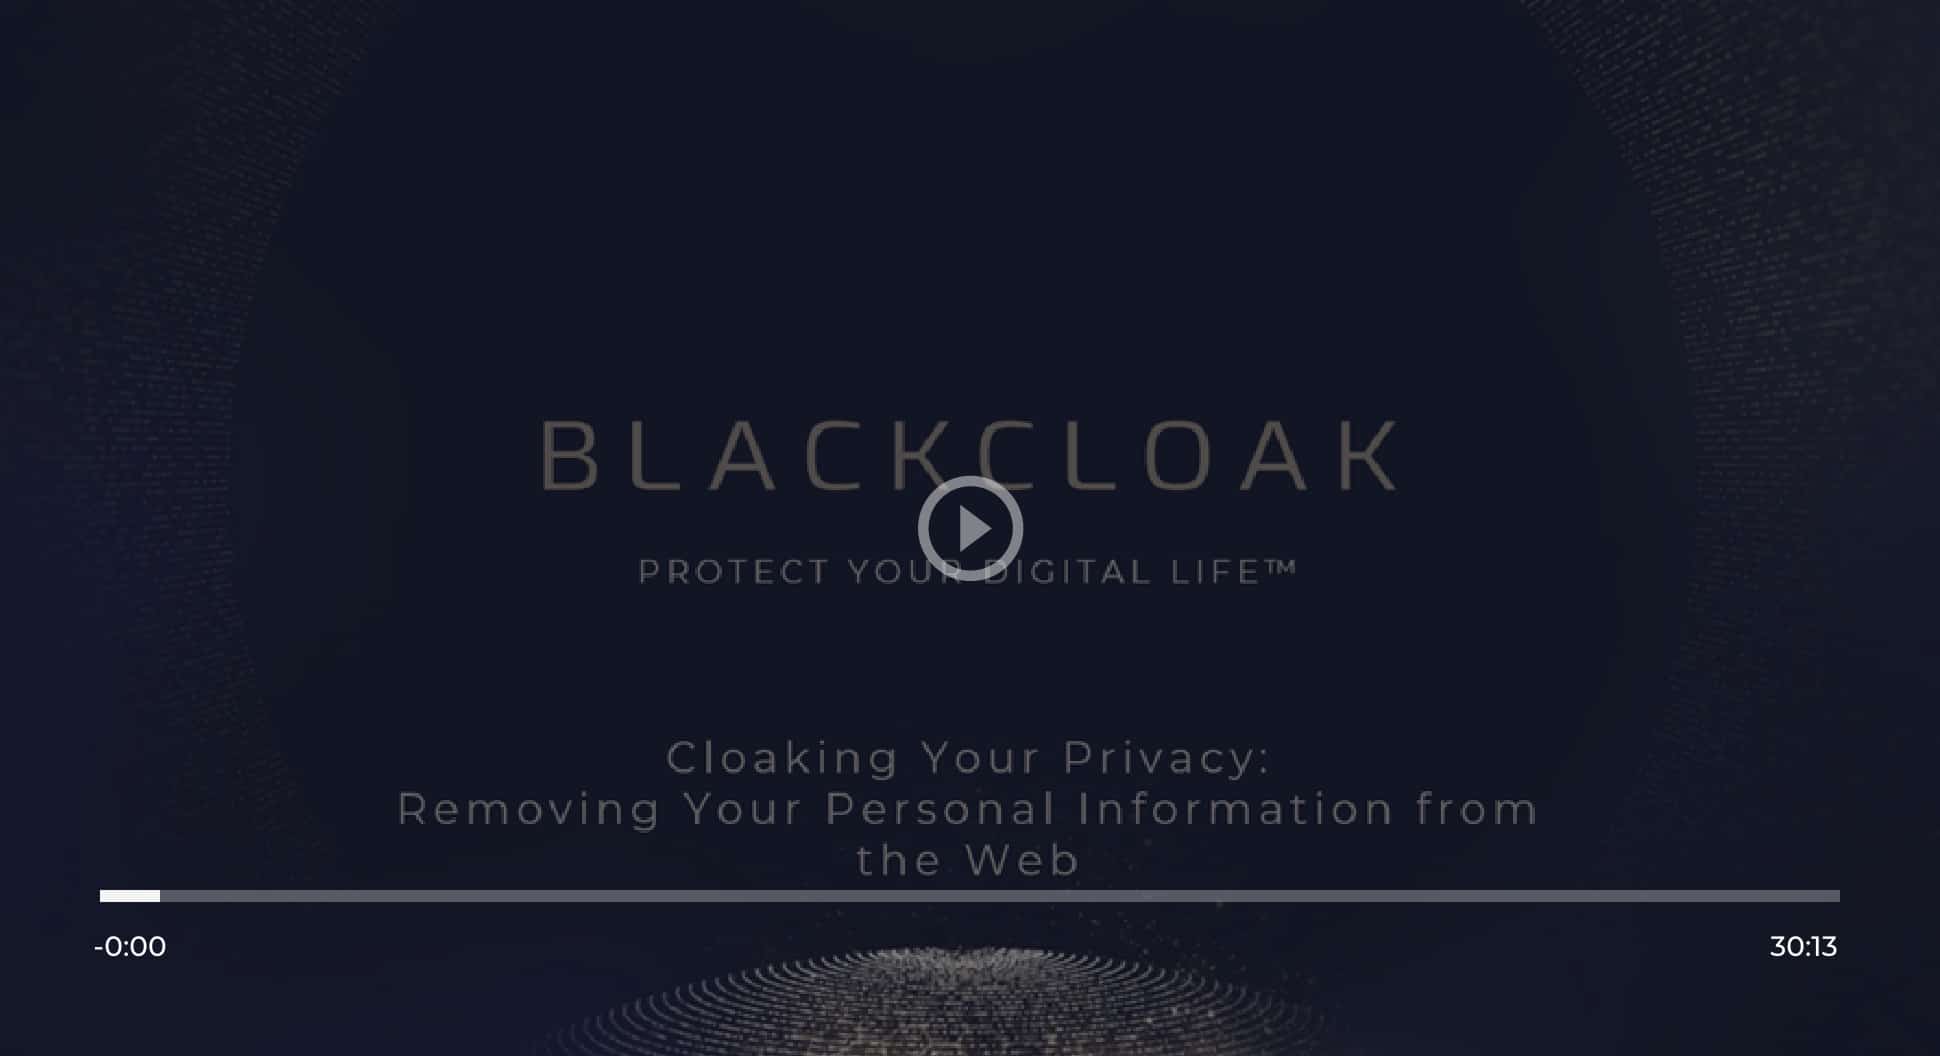 BlackCloak: data broker removal services and other personal information removal